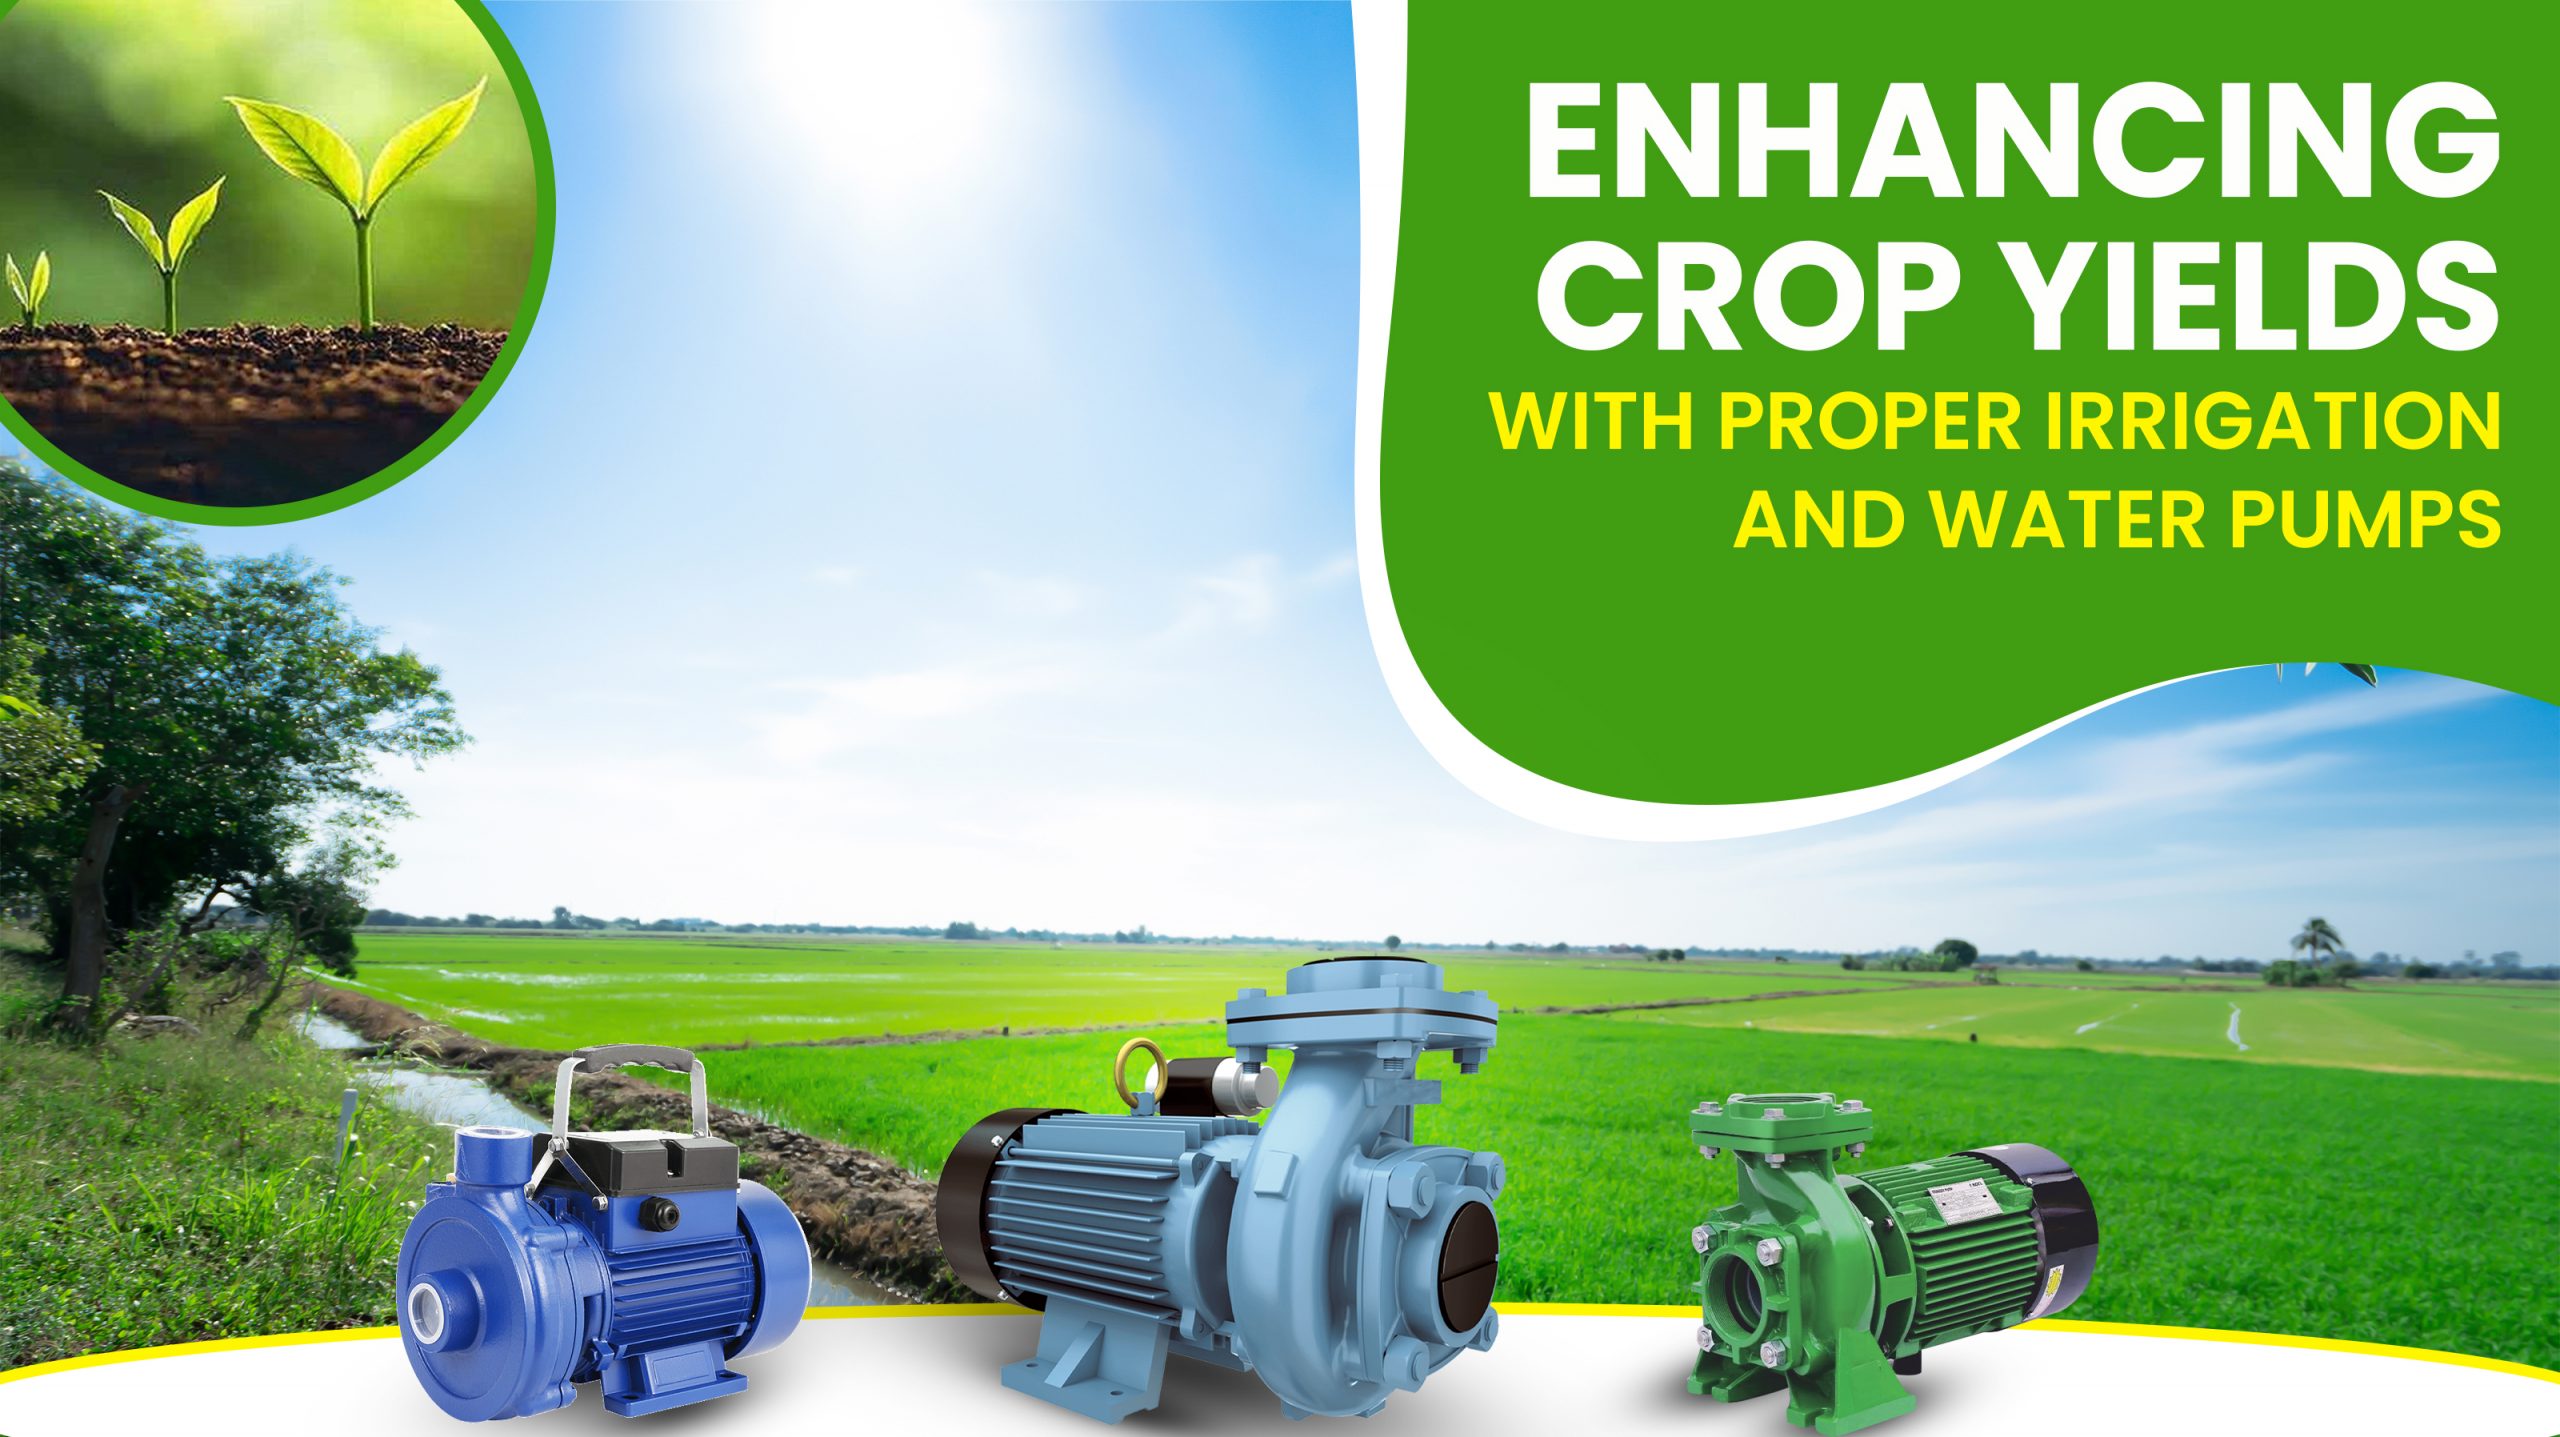 Enhancing Crop Yields with Proper Irrigation and Water Pumps